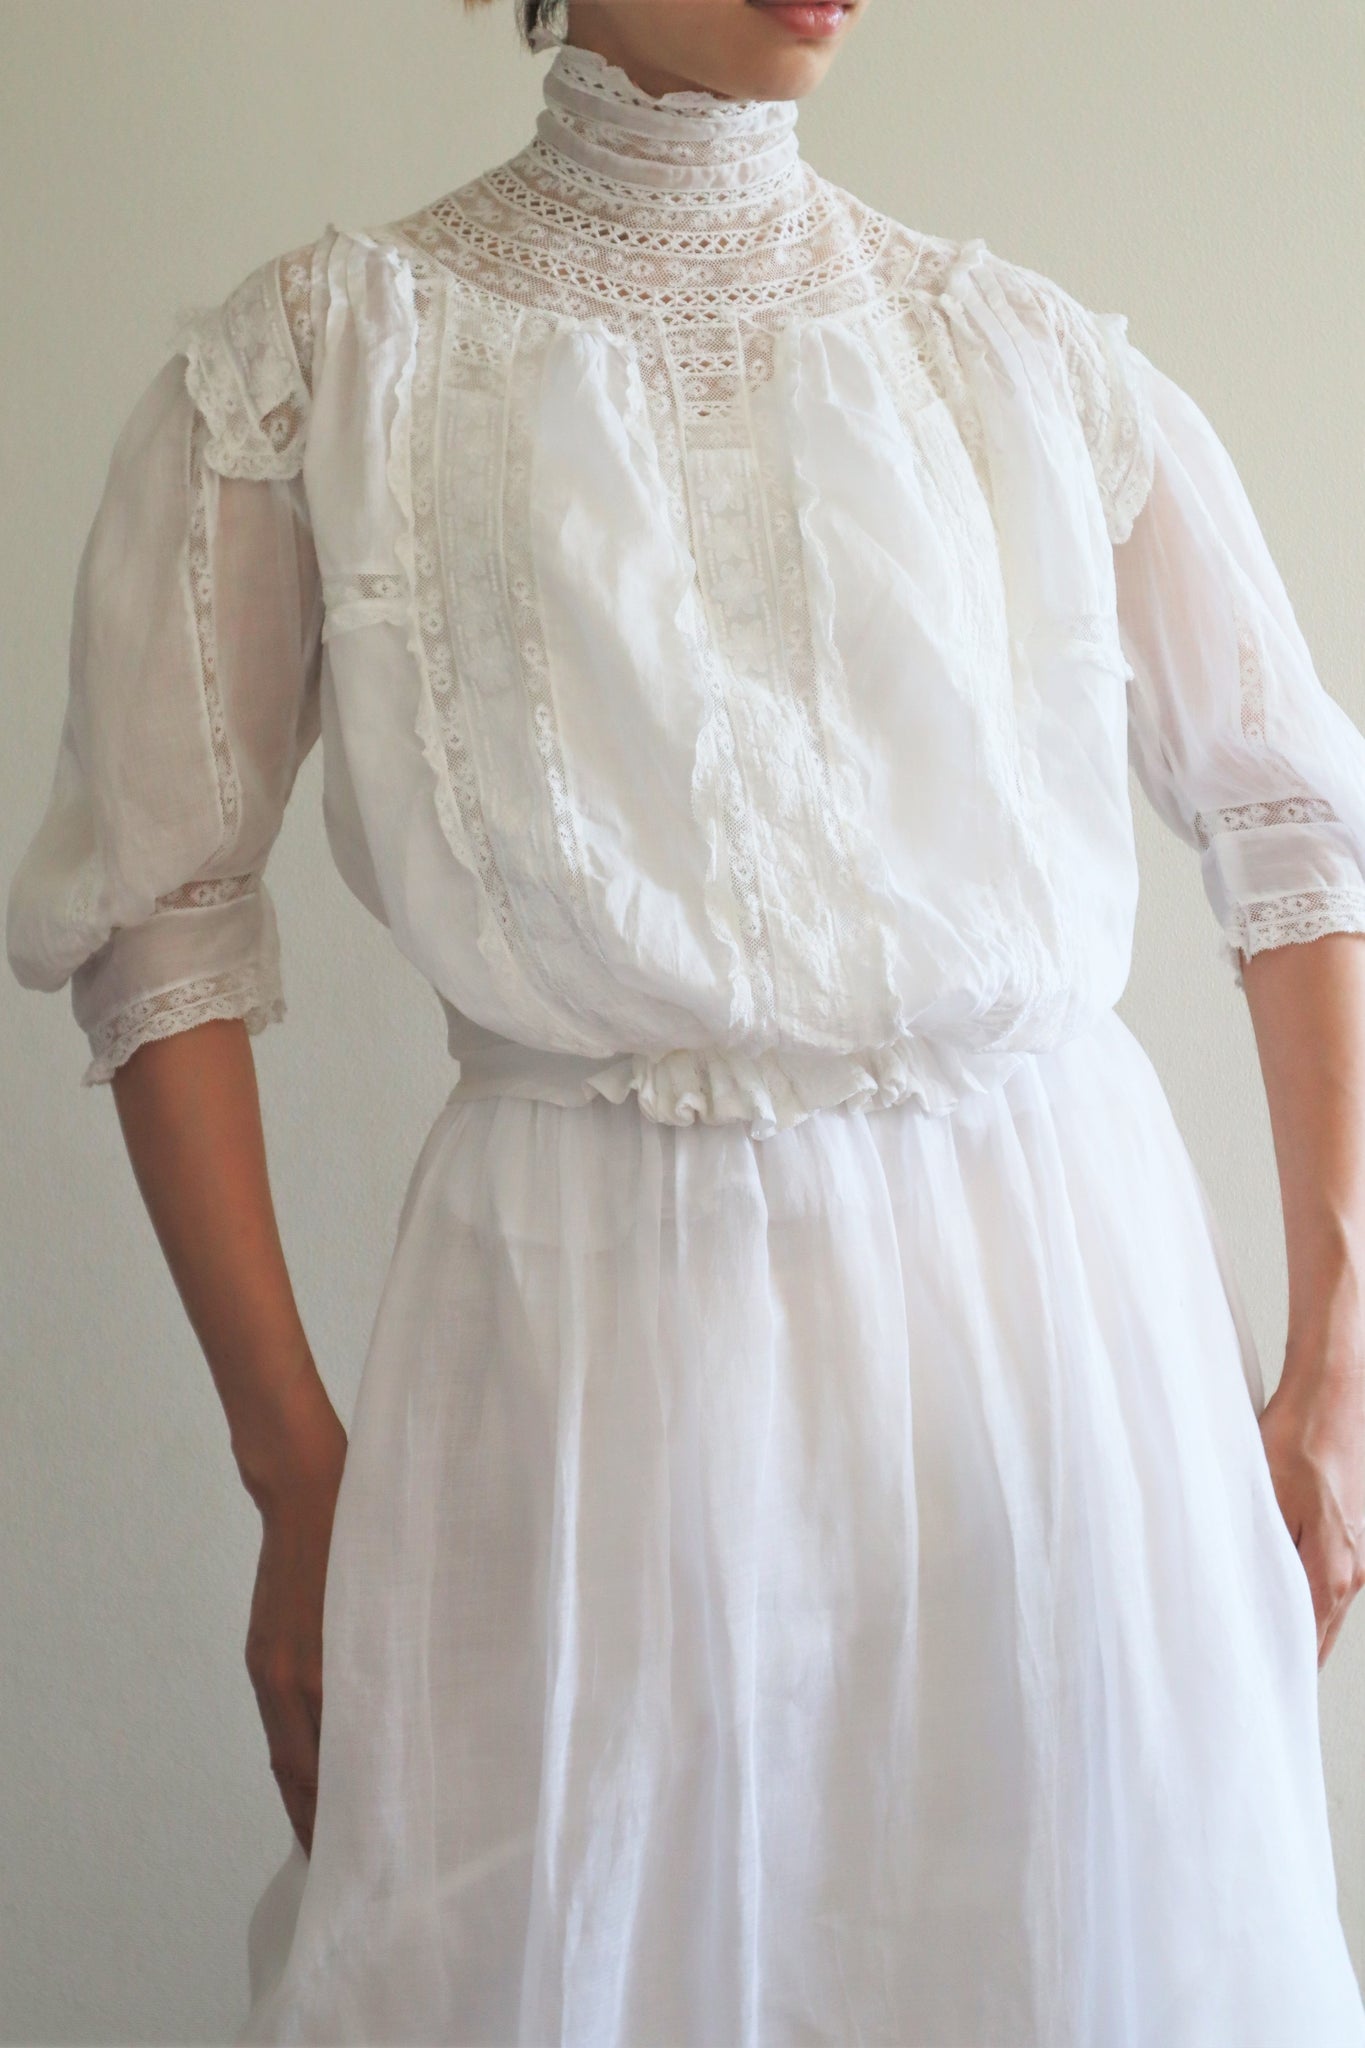 1900s French Lace High Neck Cotton Blouse